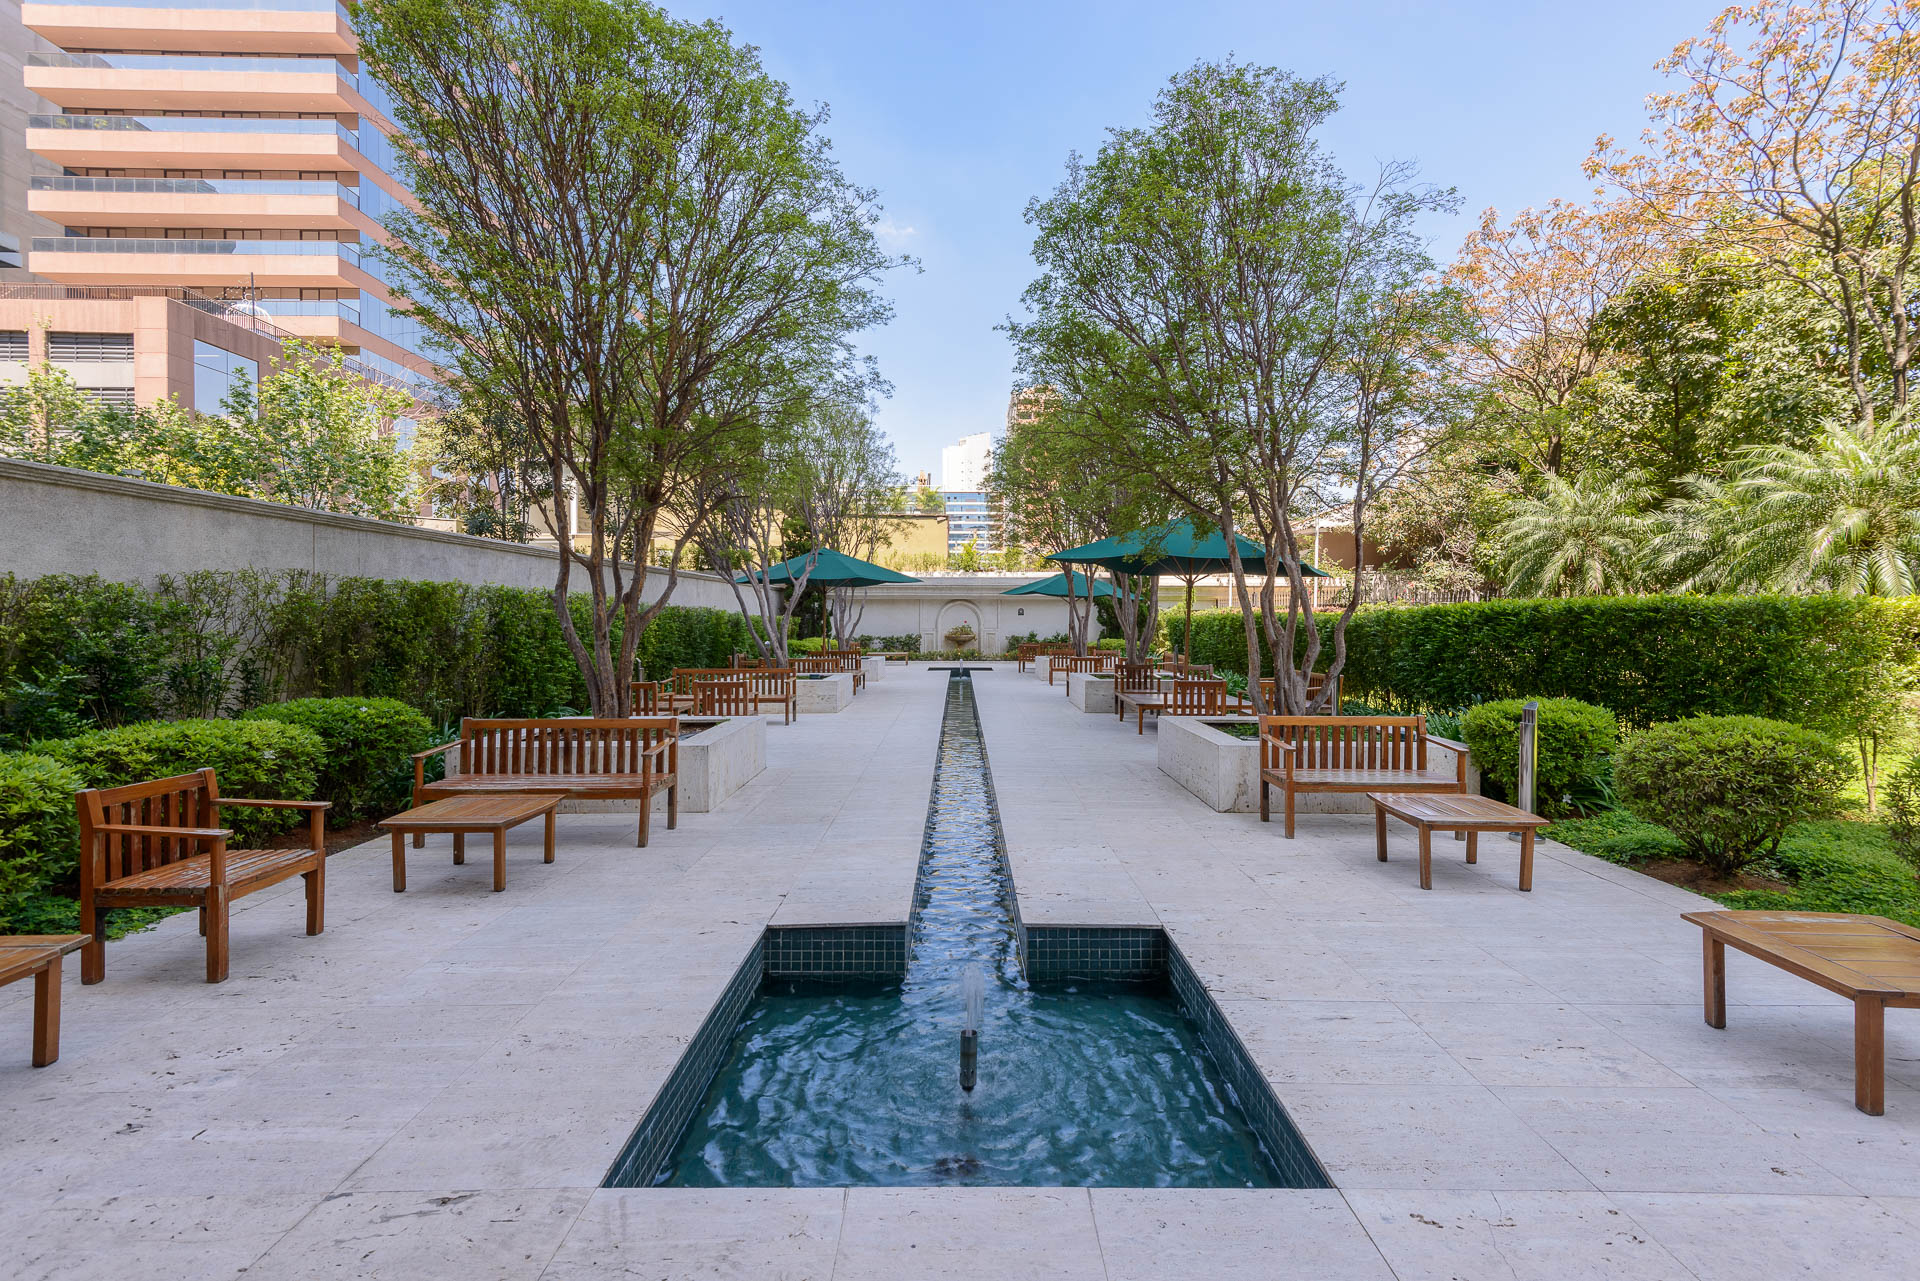 JK 1455 fountain outdoor with benches at the perimeter of the common area